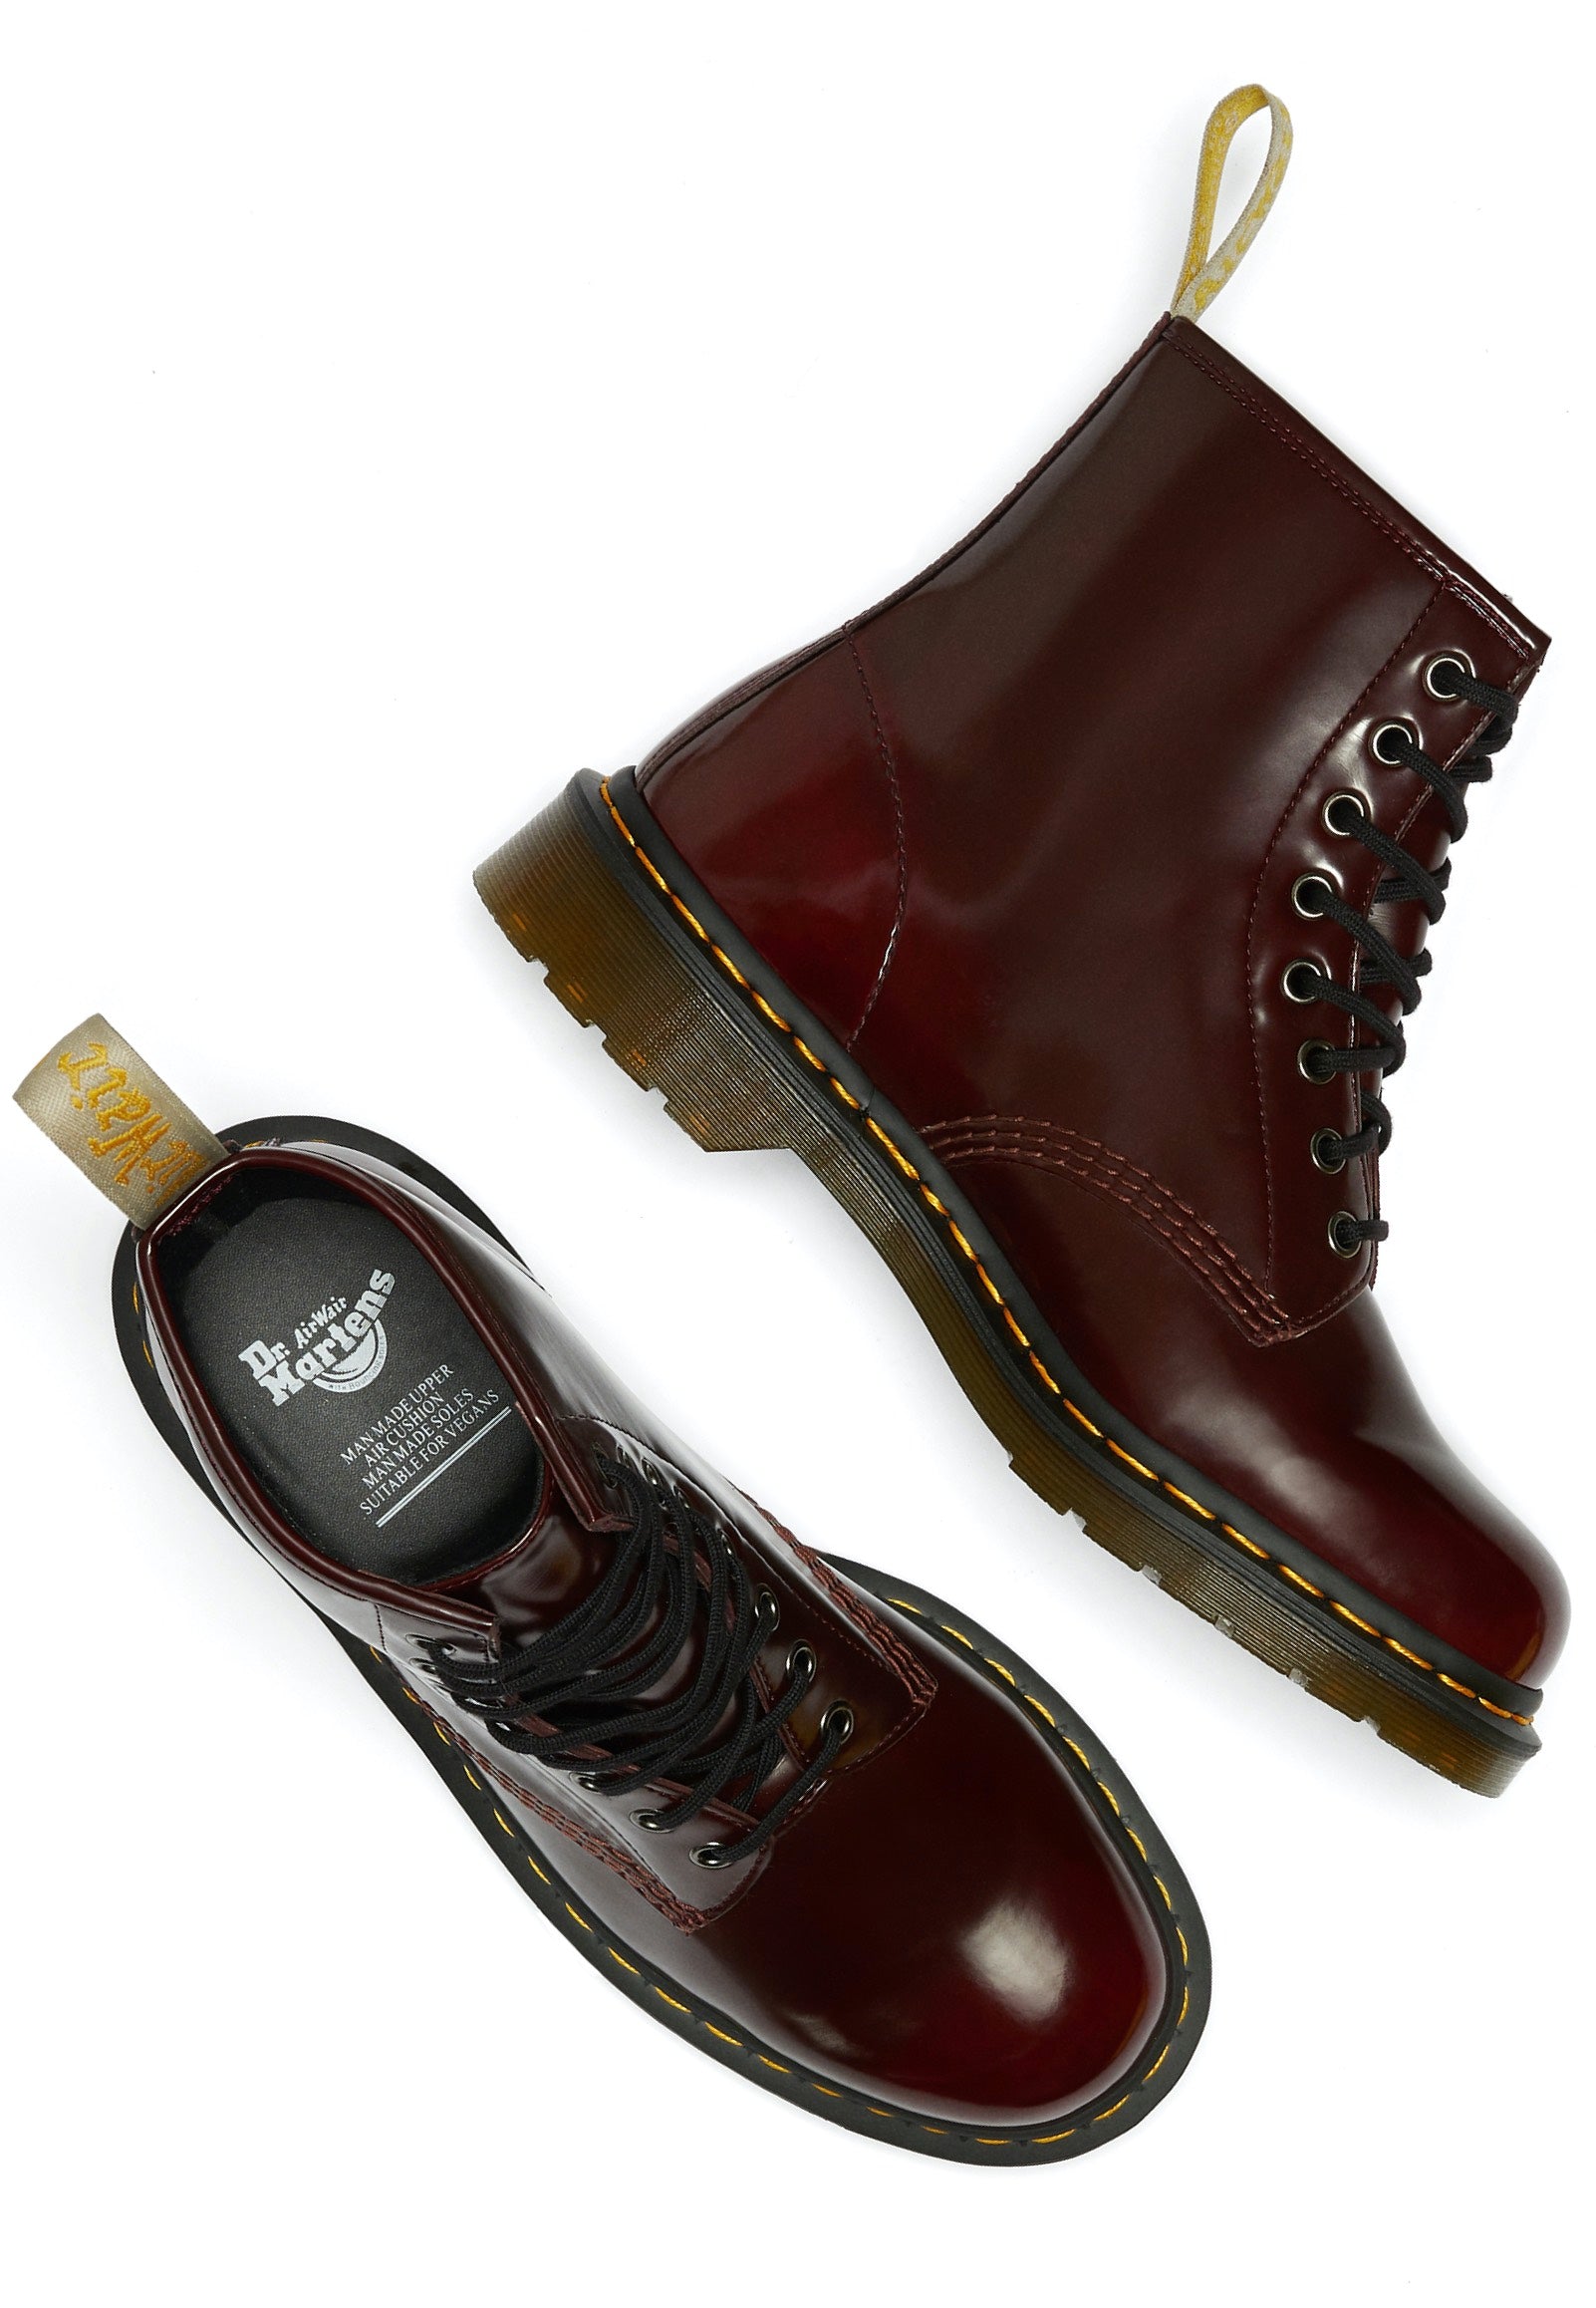 Dr. Martens - Vegan 1460 Cherry Red Oxford Rub Off Red - Shoes